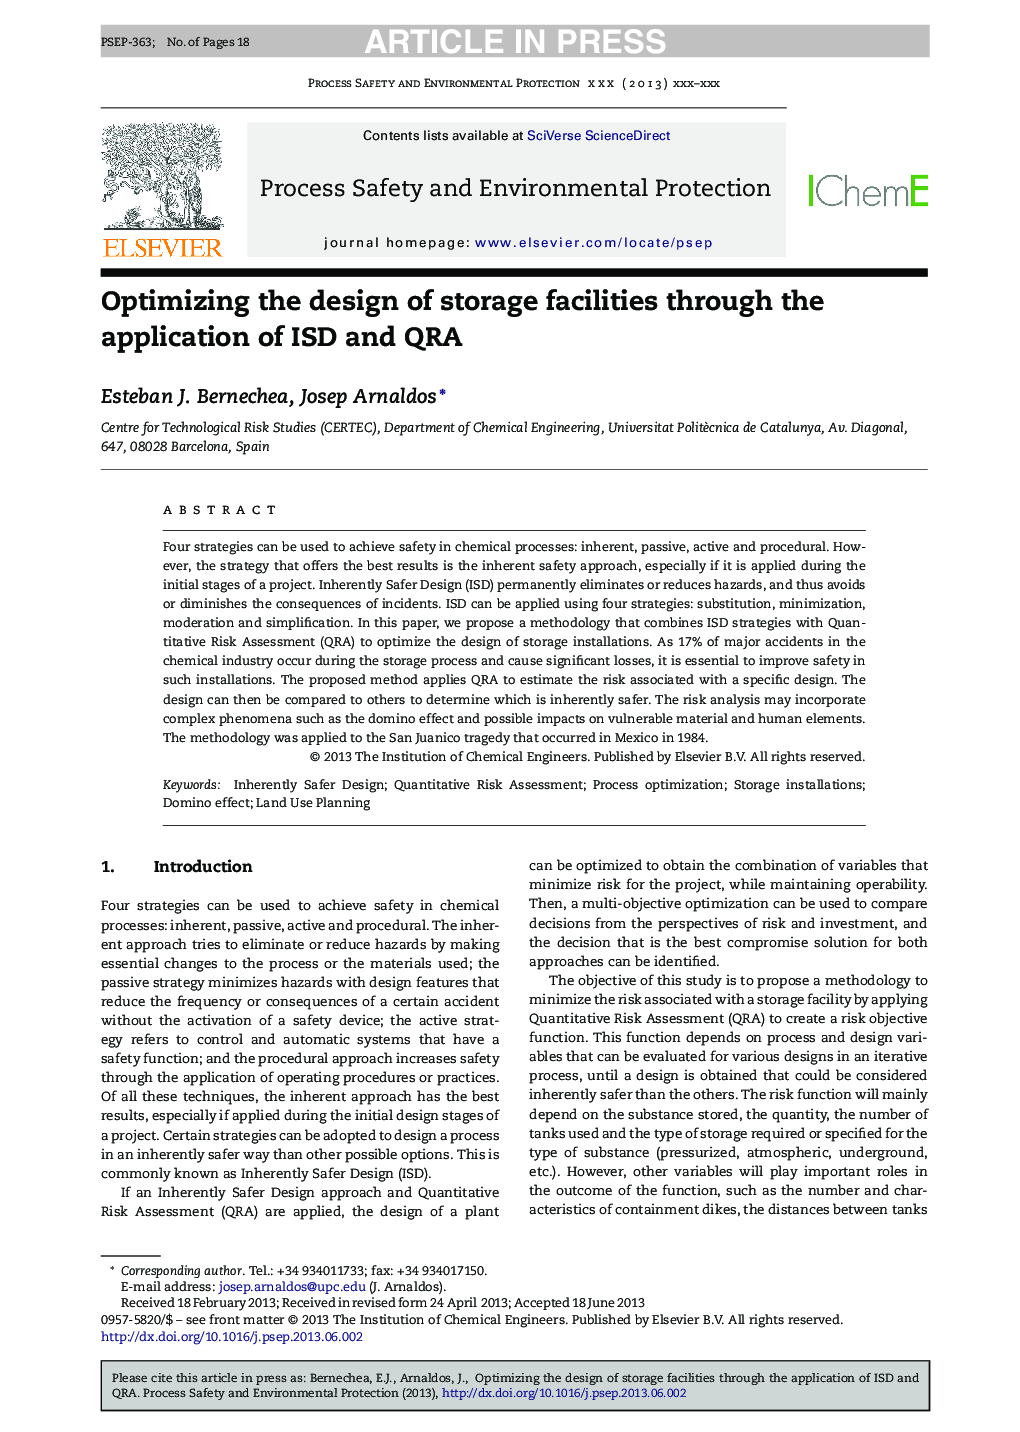 Optimizing the design of storage facilities through the application of ISD and QRA